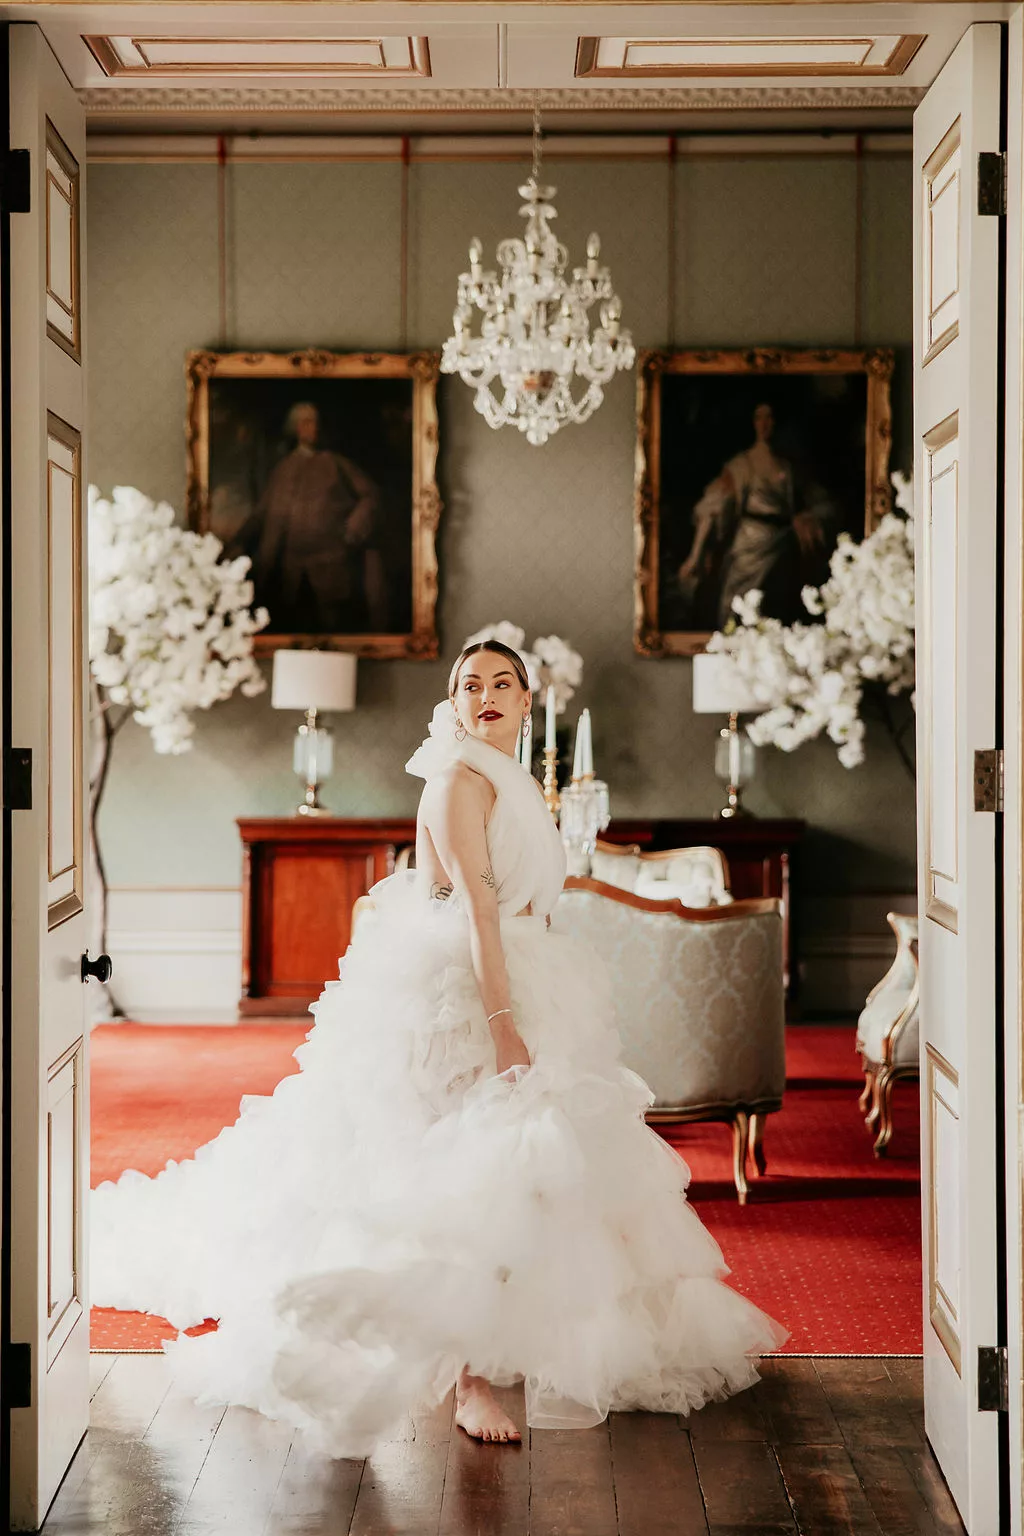 Dine Venues | Rise Hall | Winter wedding in Yorkshire | Stately home wedding venue | White wedding | Natalie Hamilton Photography